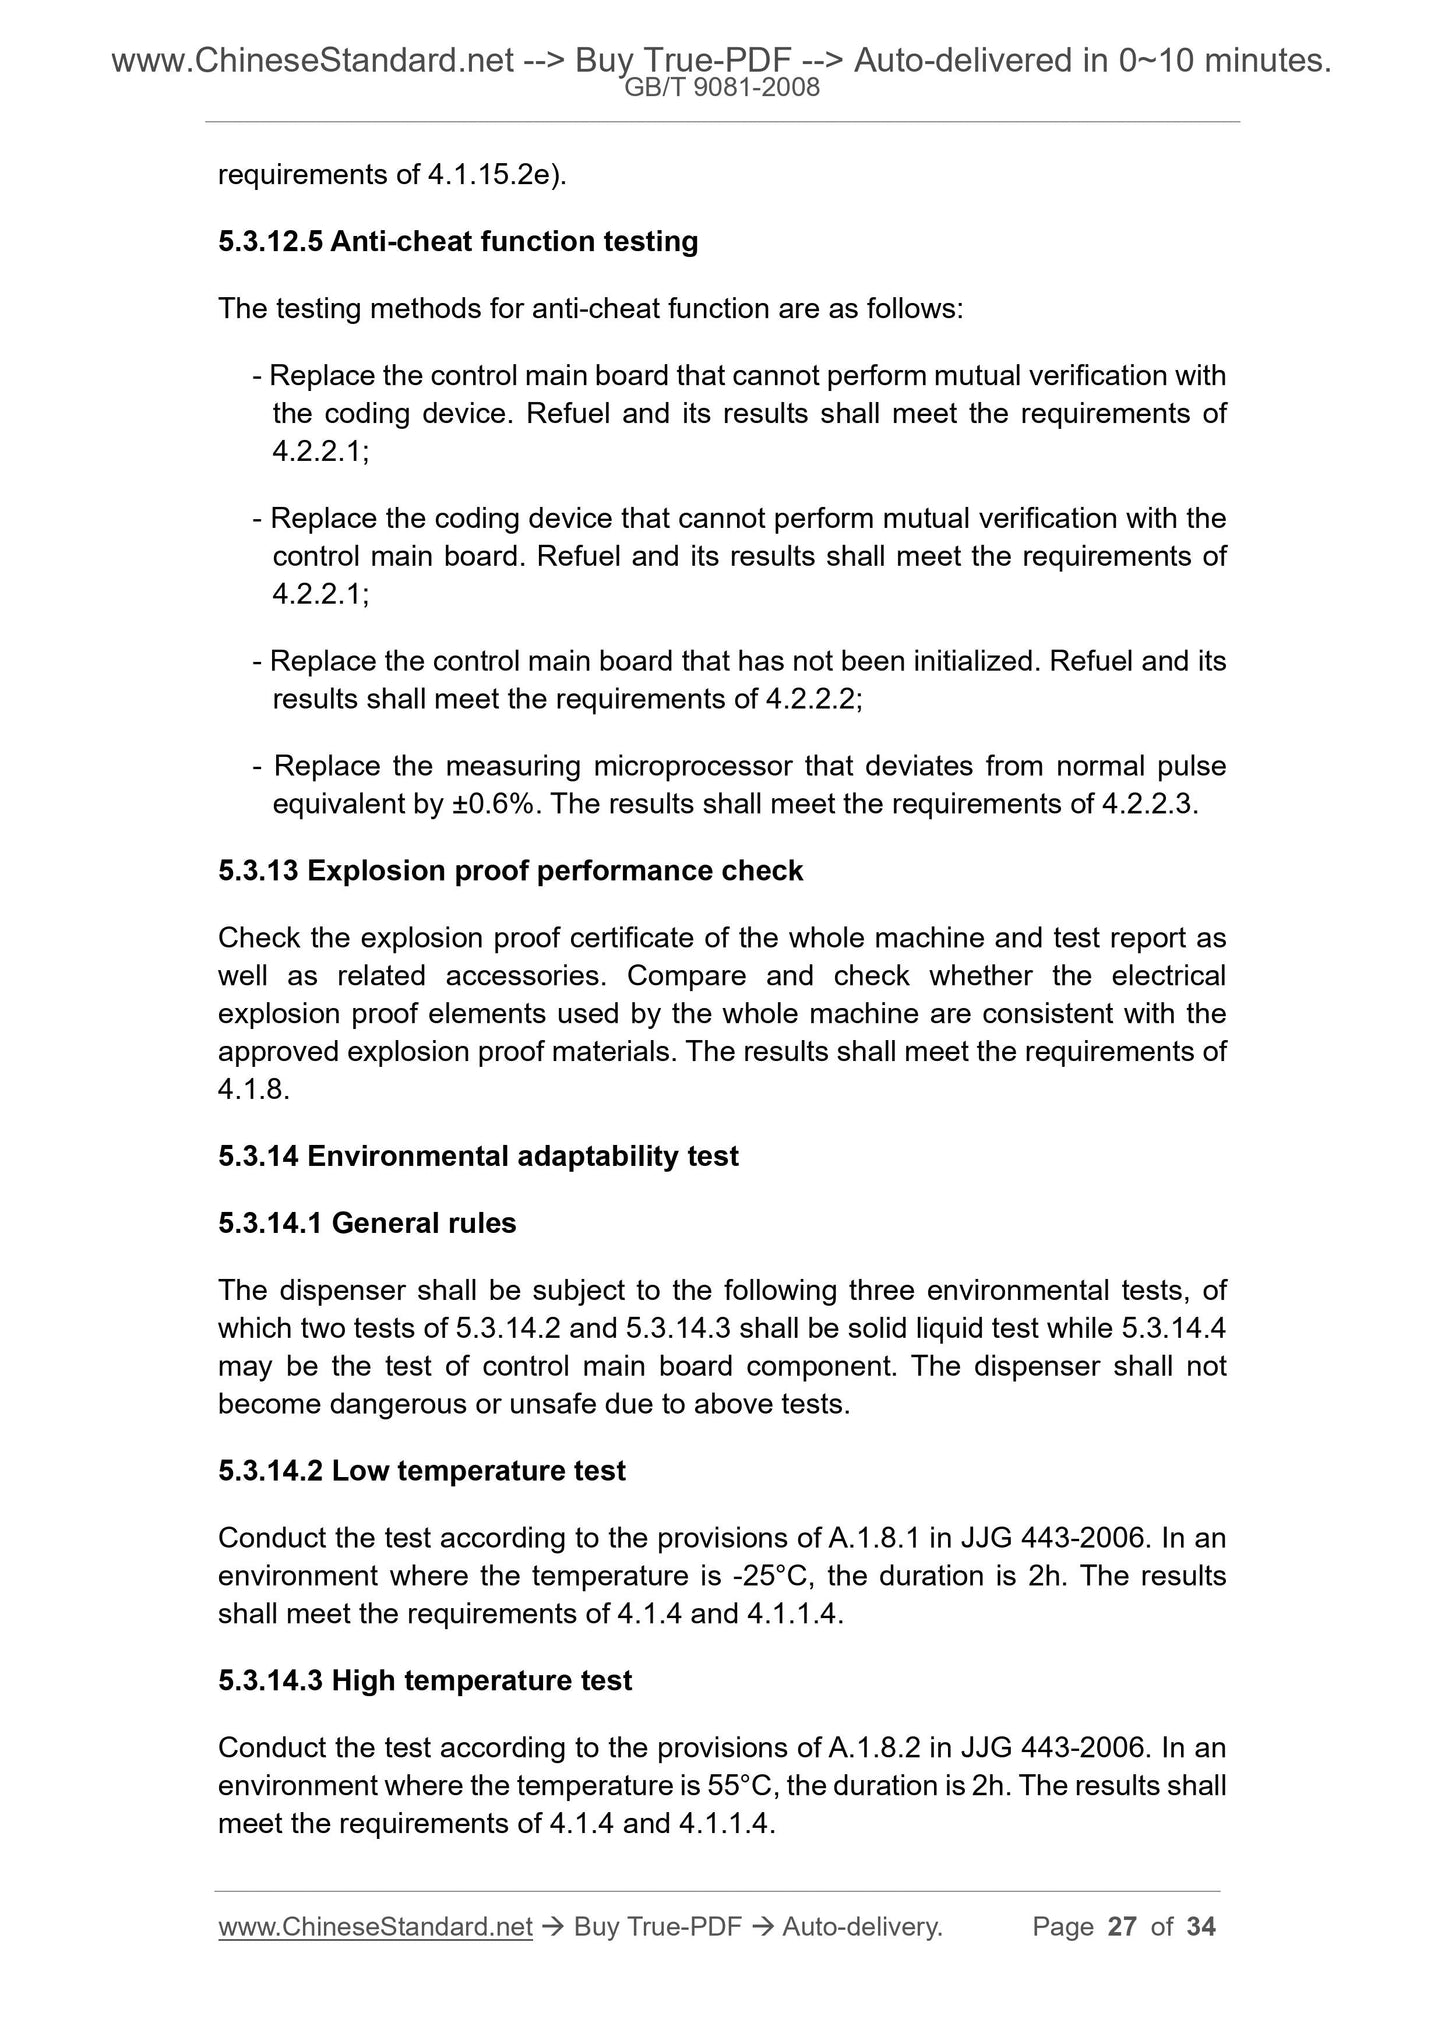 GB/T 9081-2008 Page 10